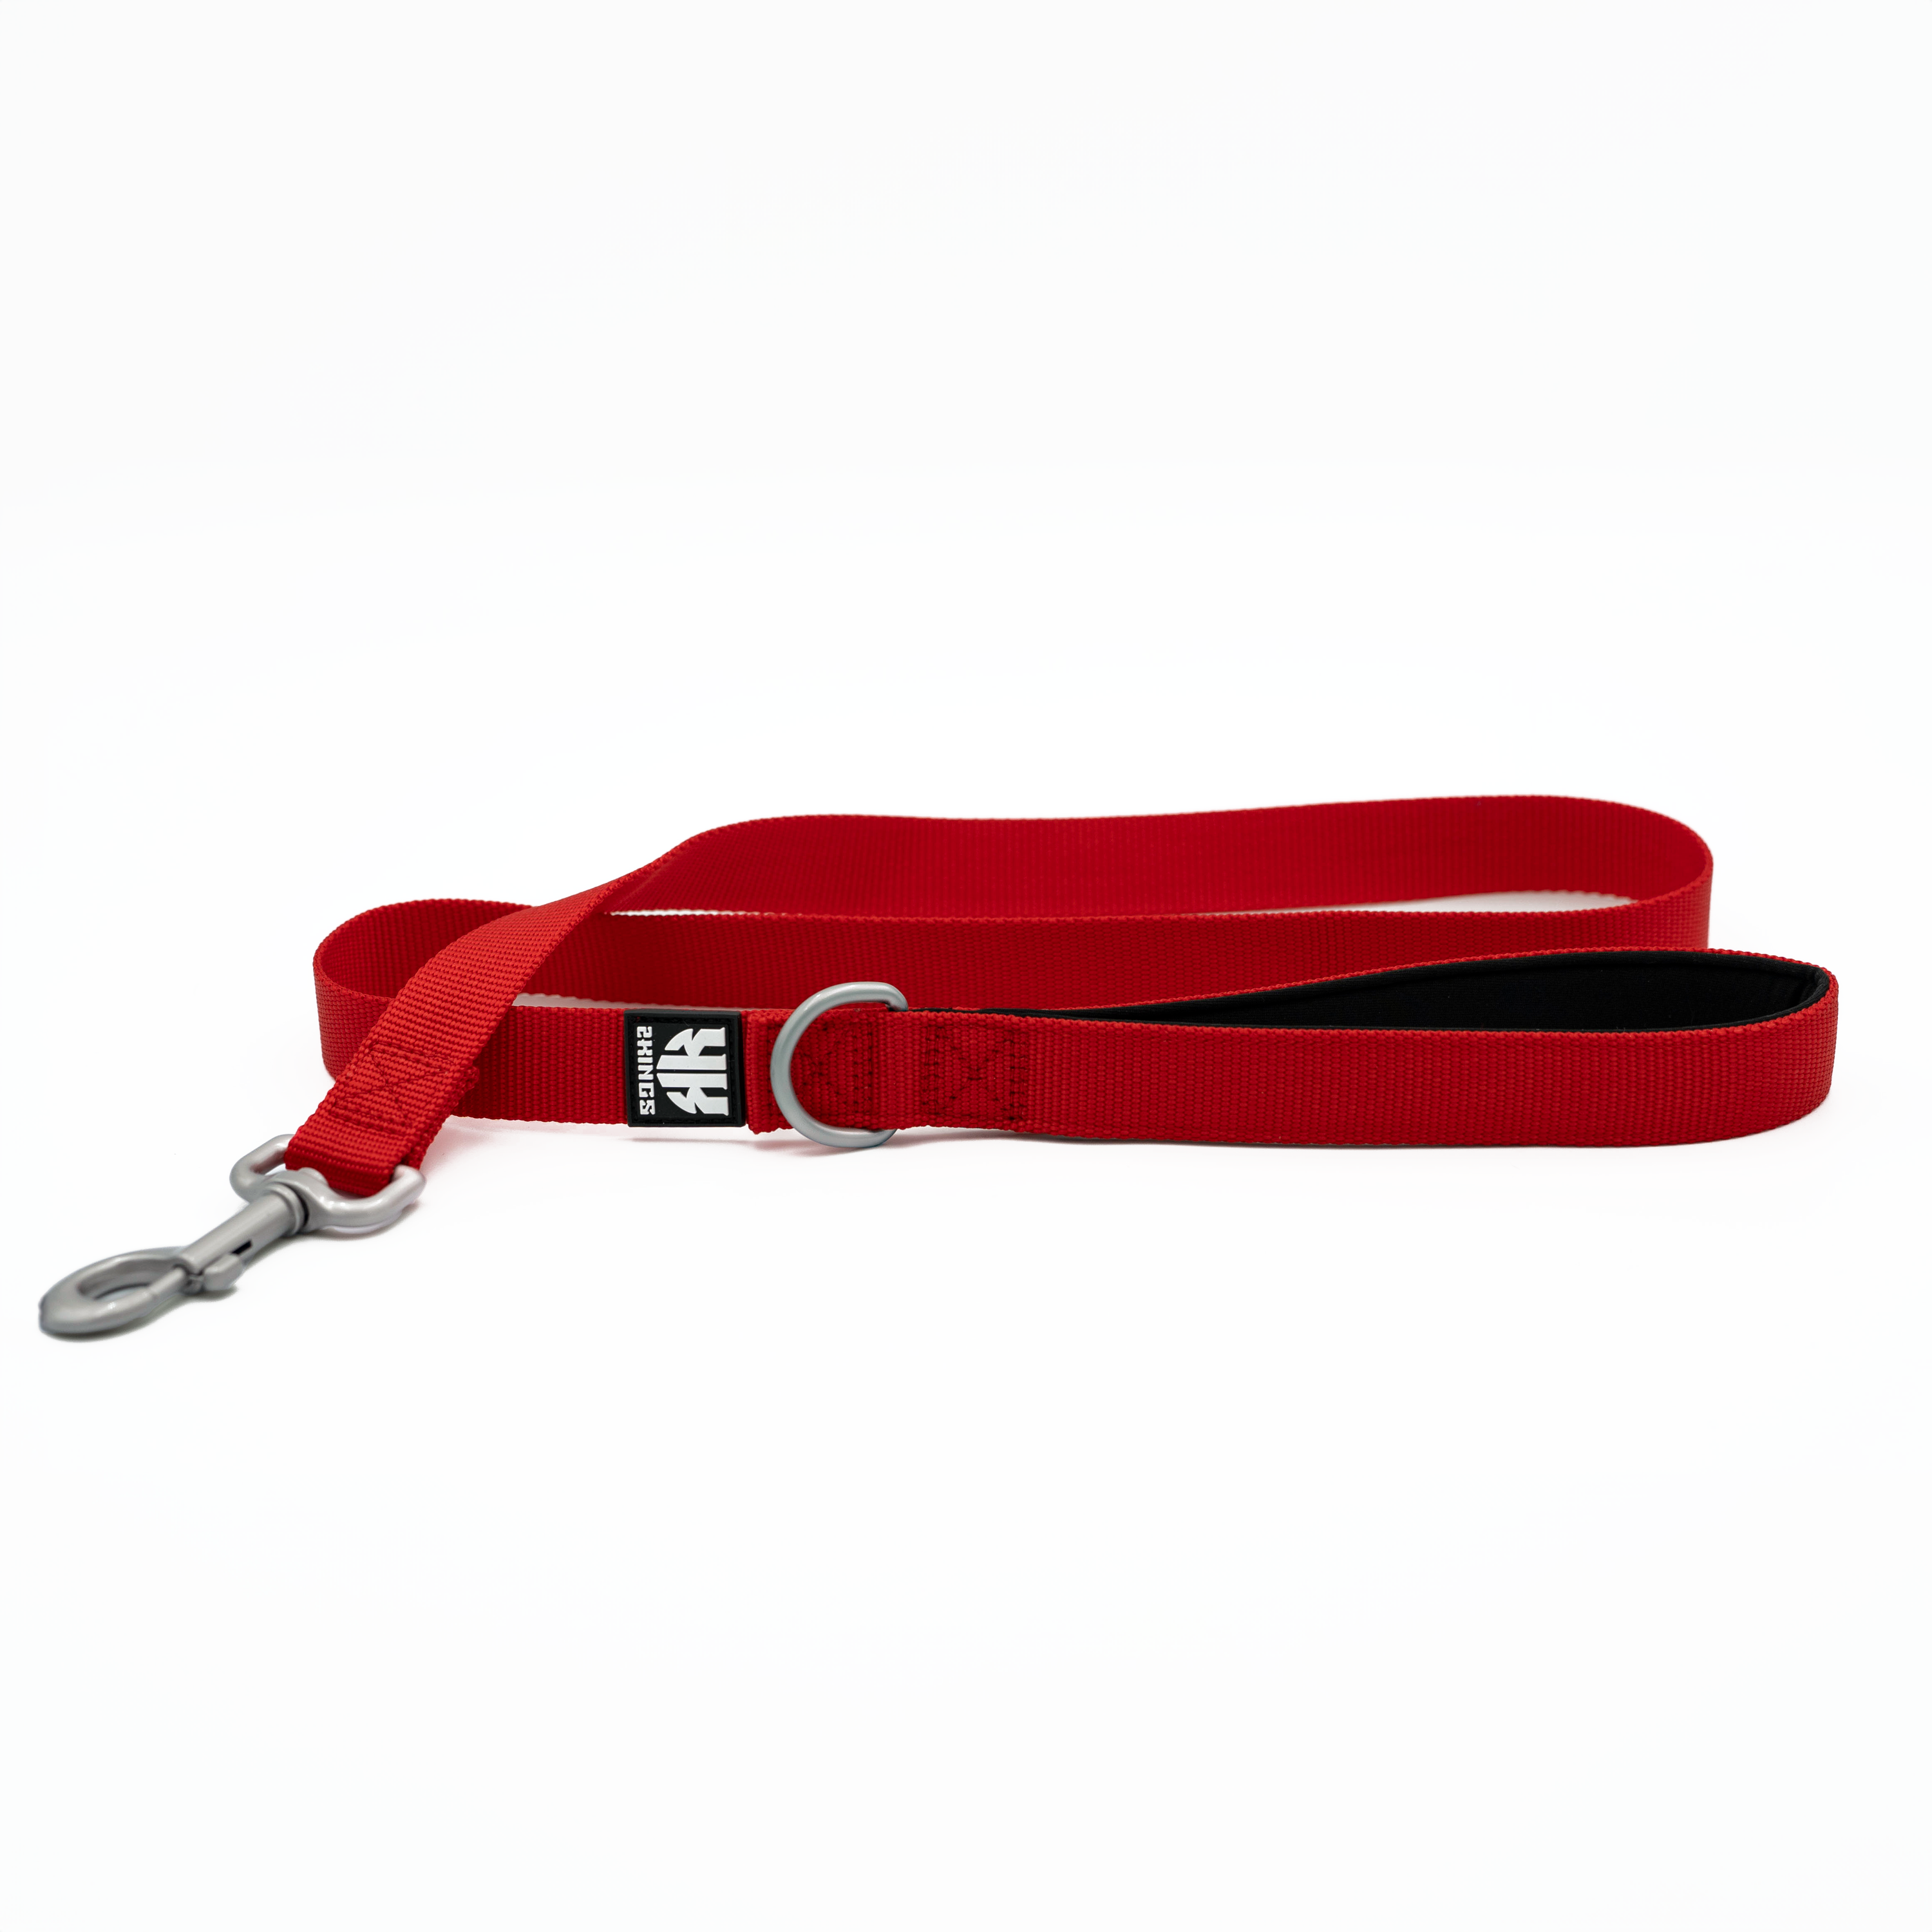 Comfort Dog Harness & Classic Lead Set - Waterproof with Top Handle -Red.